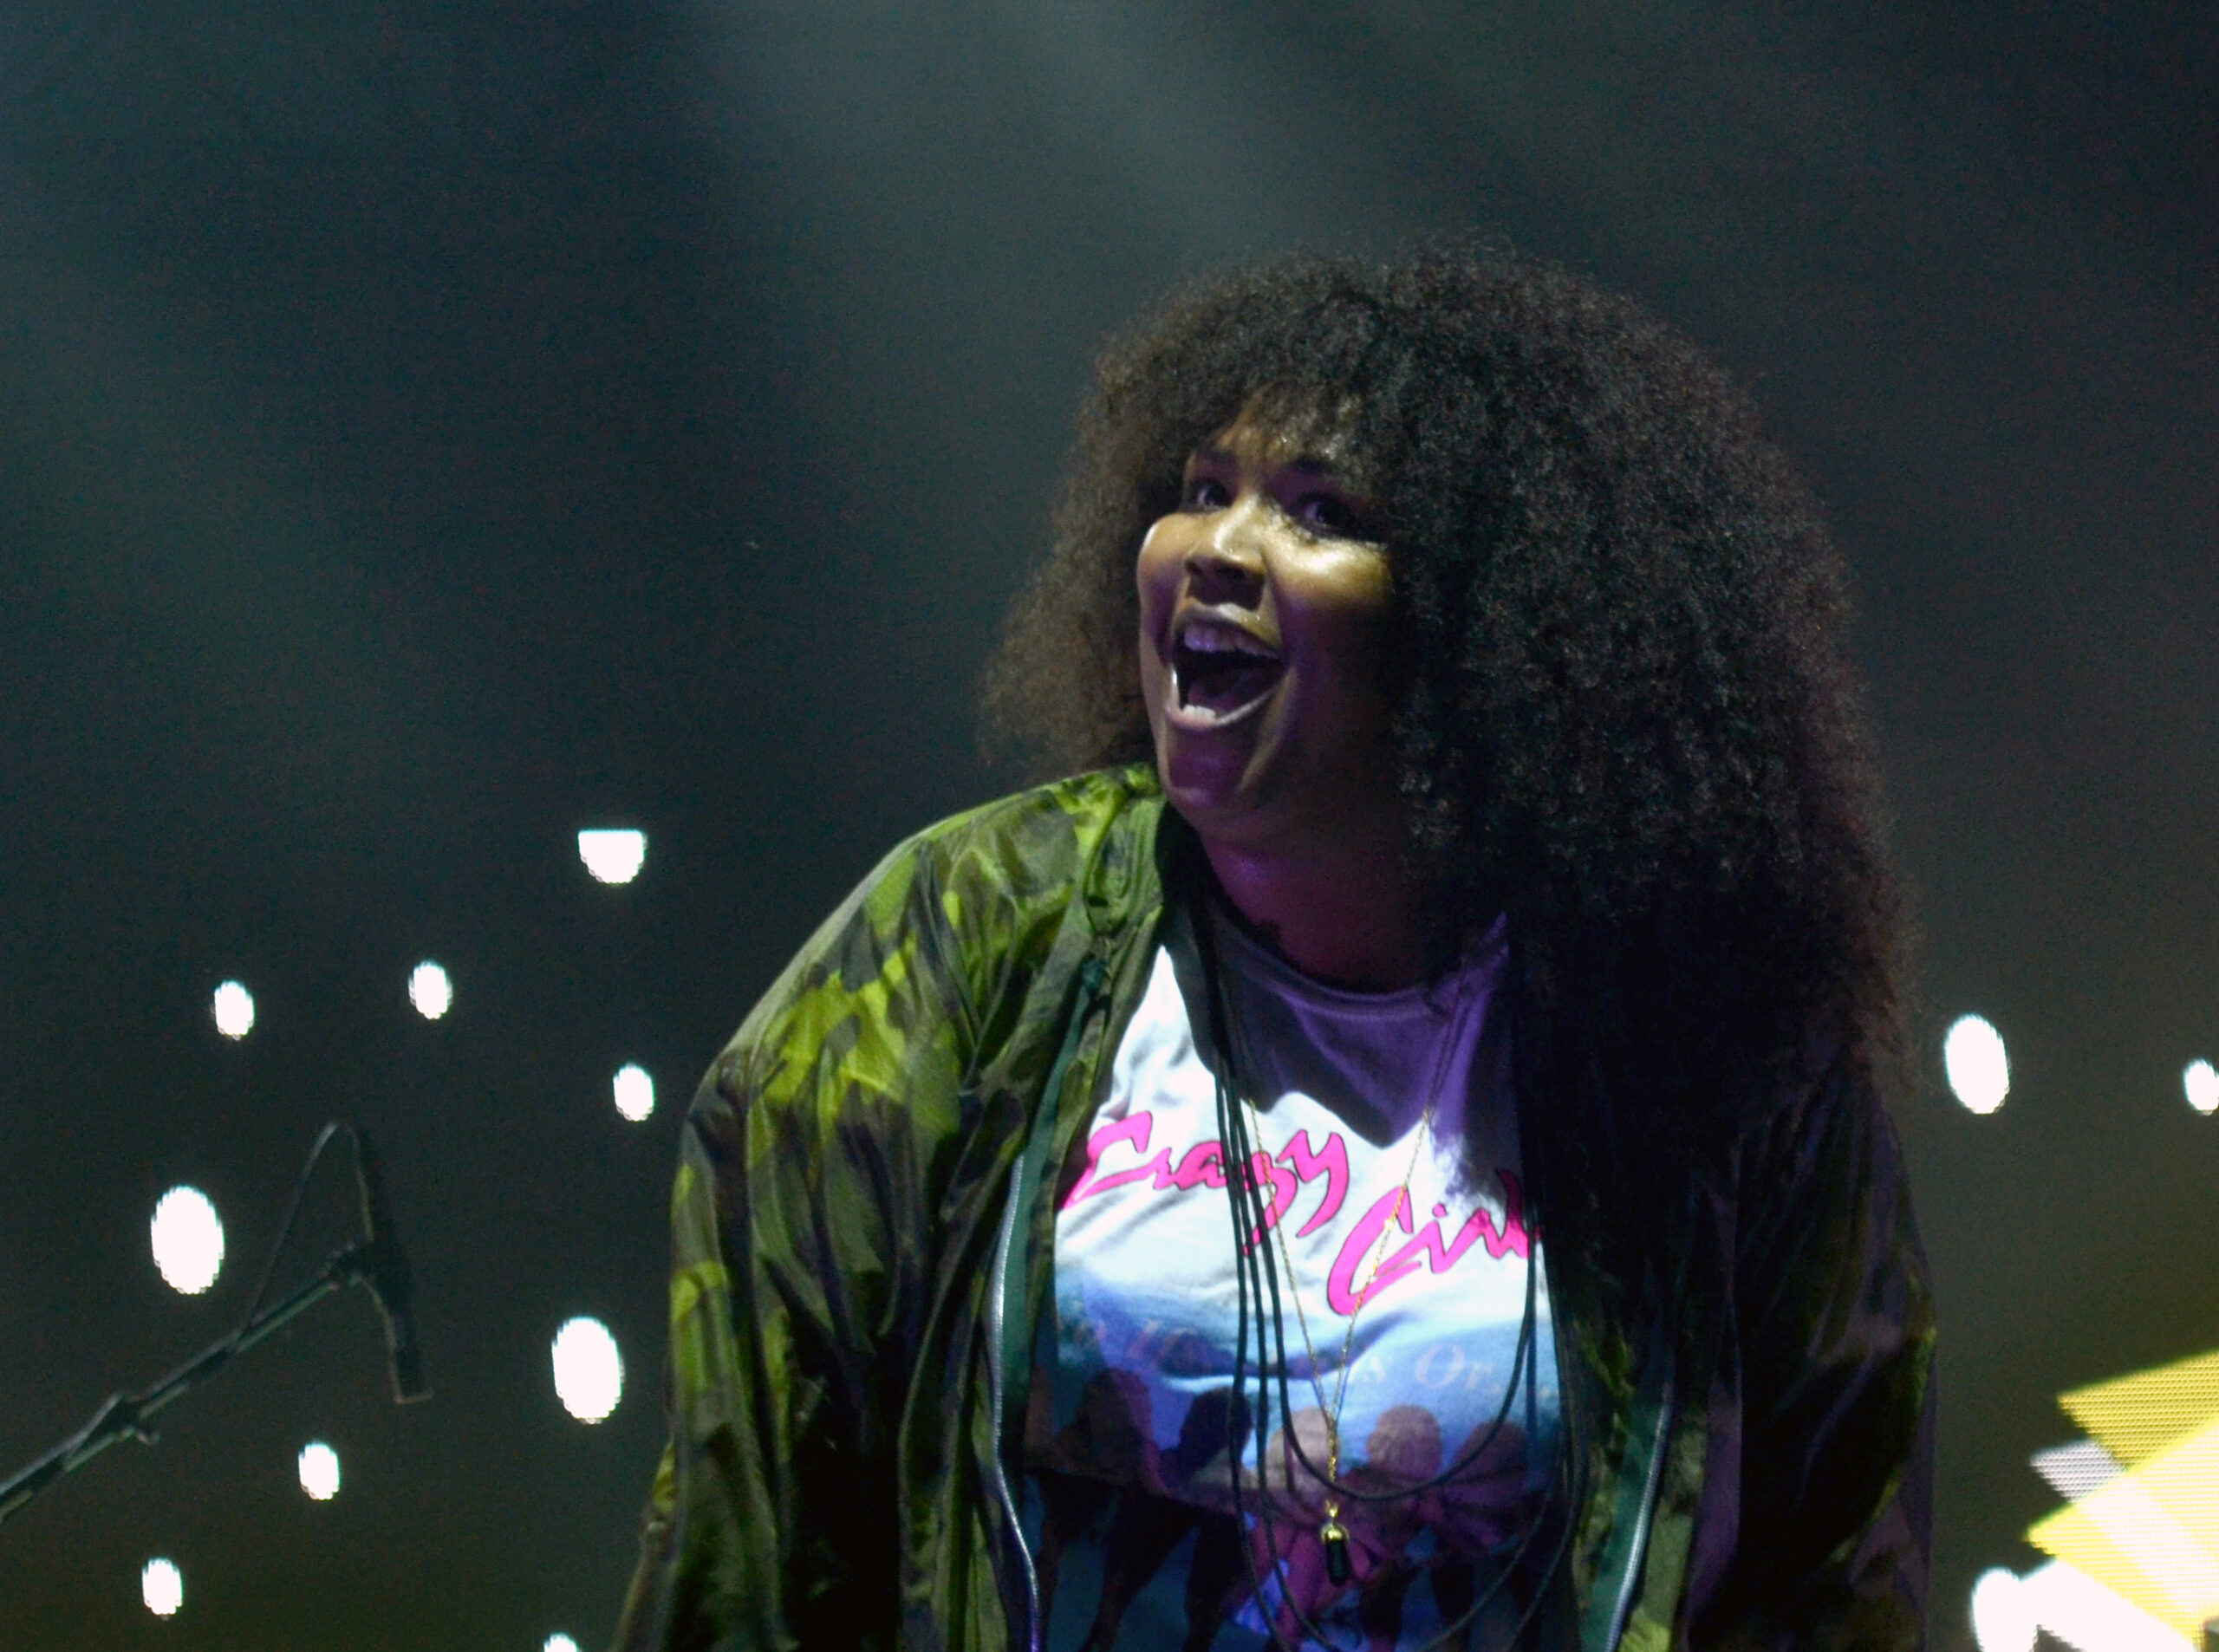 Rapper/Singer Lizzo Talks Getting More Comfortable In Her Sound